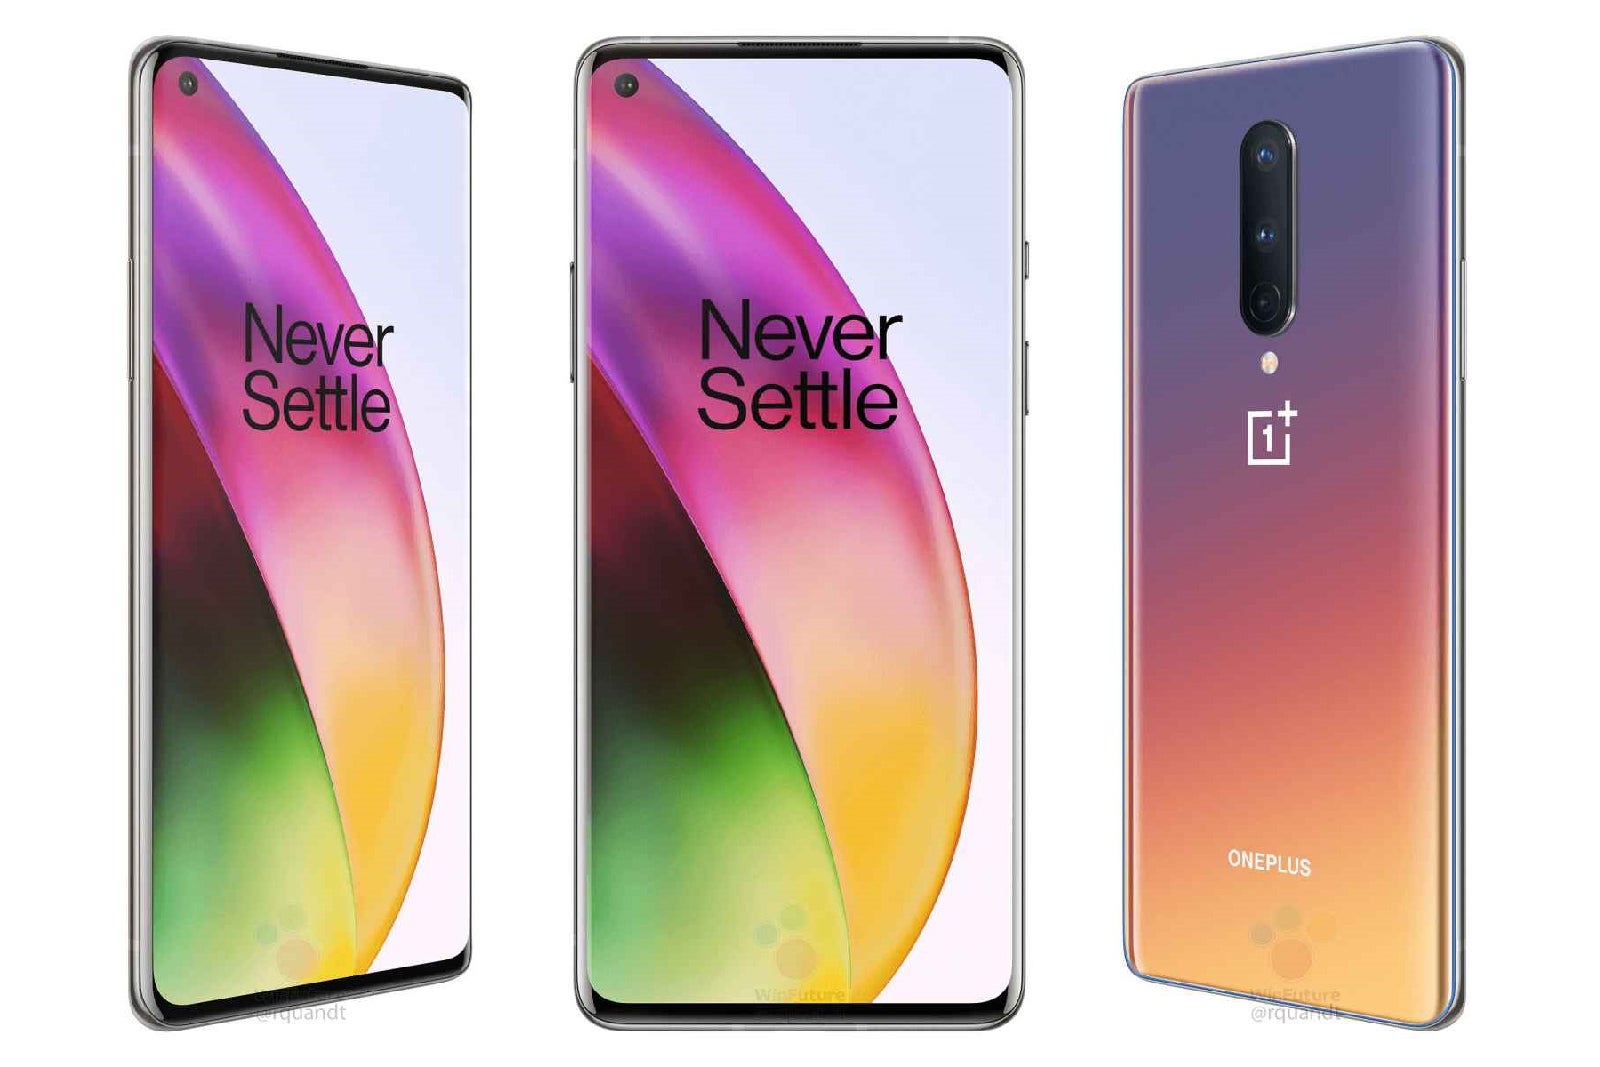 The OnePlus 8 - OnePlus CEO confirms key OnePlus 8 series specs ahead of launch